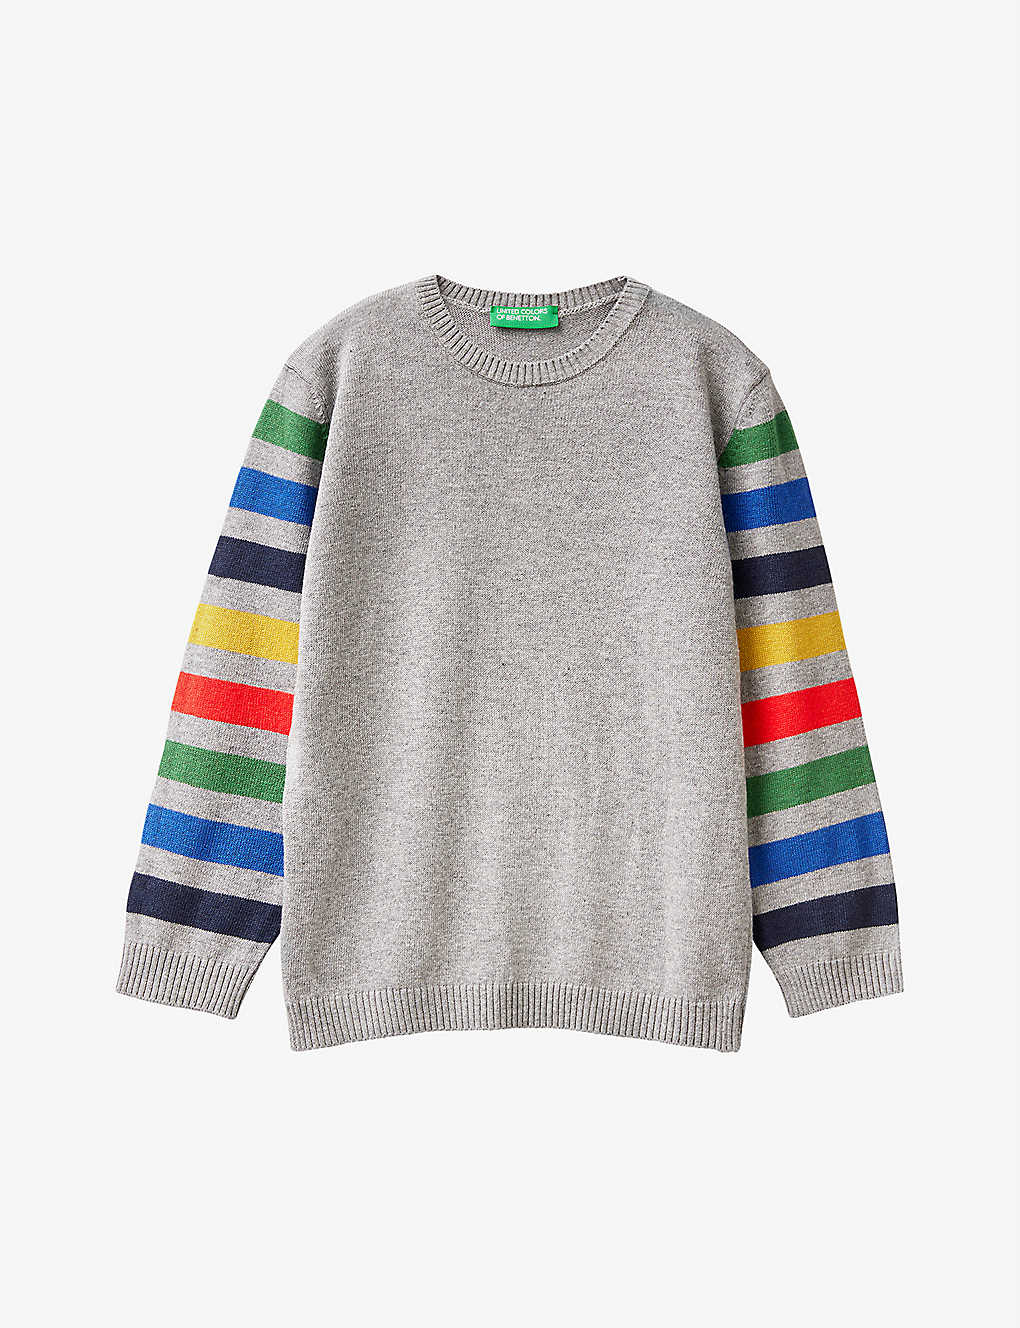 Benetton Boys Grey Kids Striped-sleeve Knitted Jumper 1-6 Years